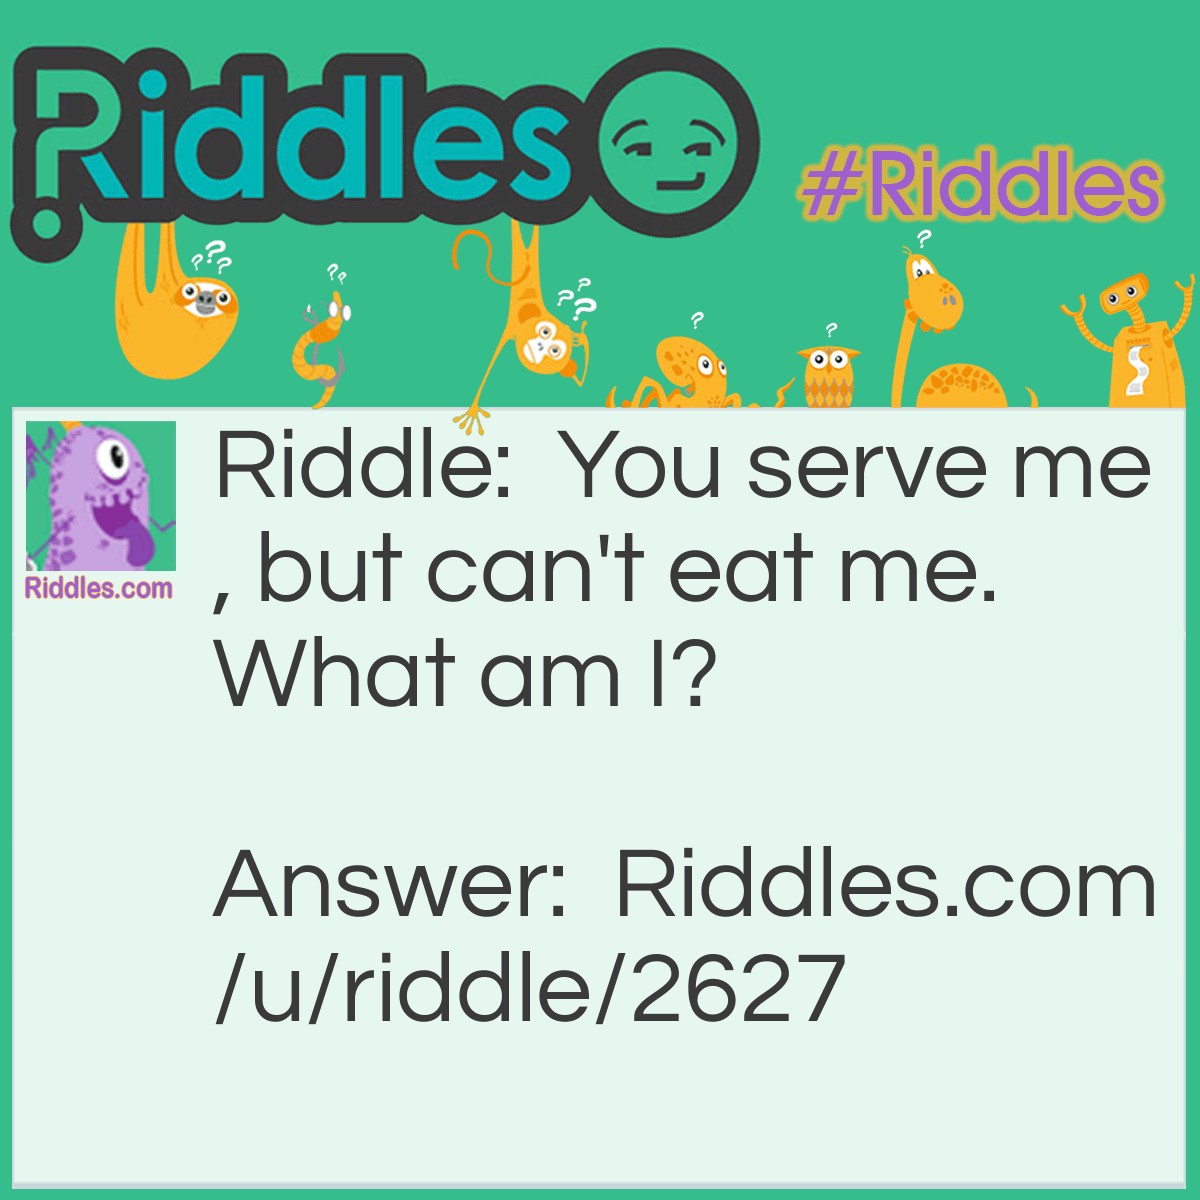 Riddle: You serve me, but can't eat me. What am I? Answer: A Tennis Ball.